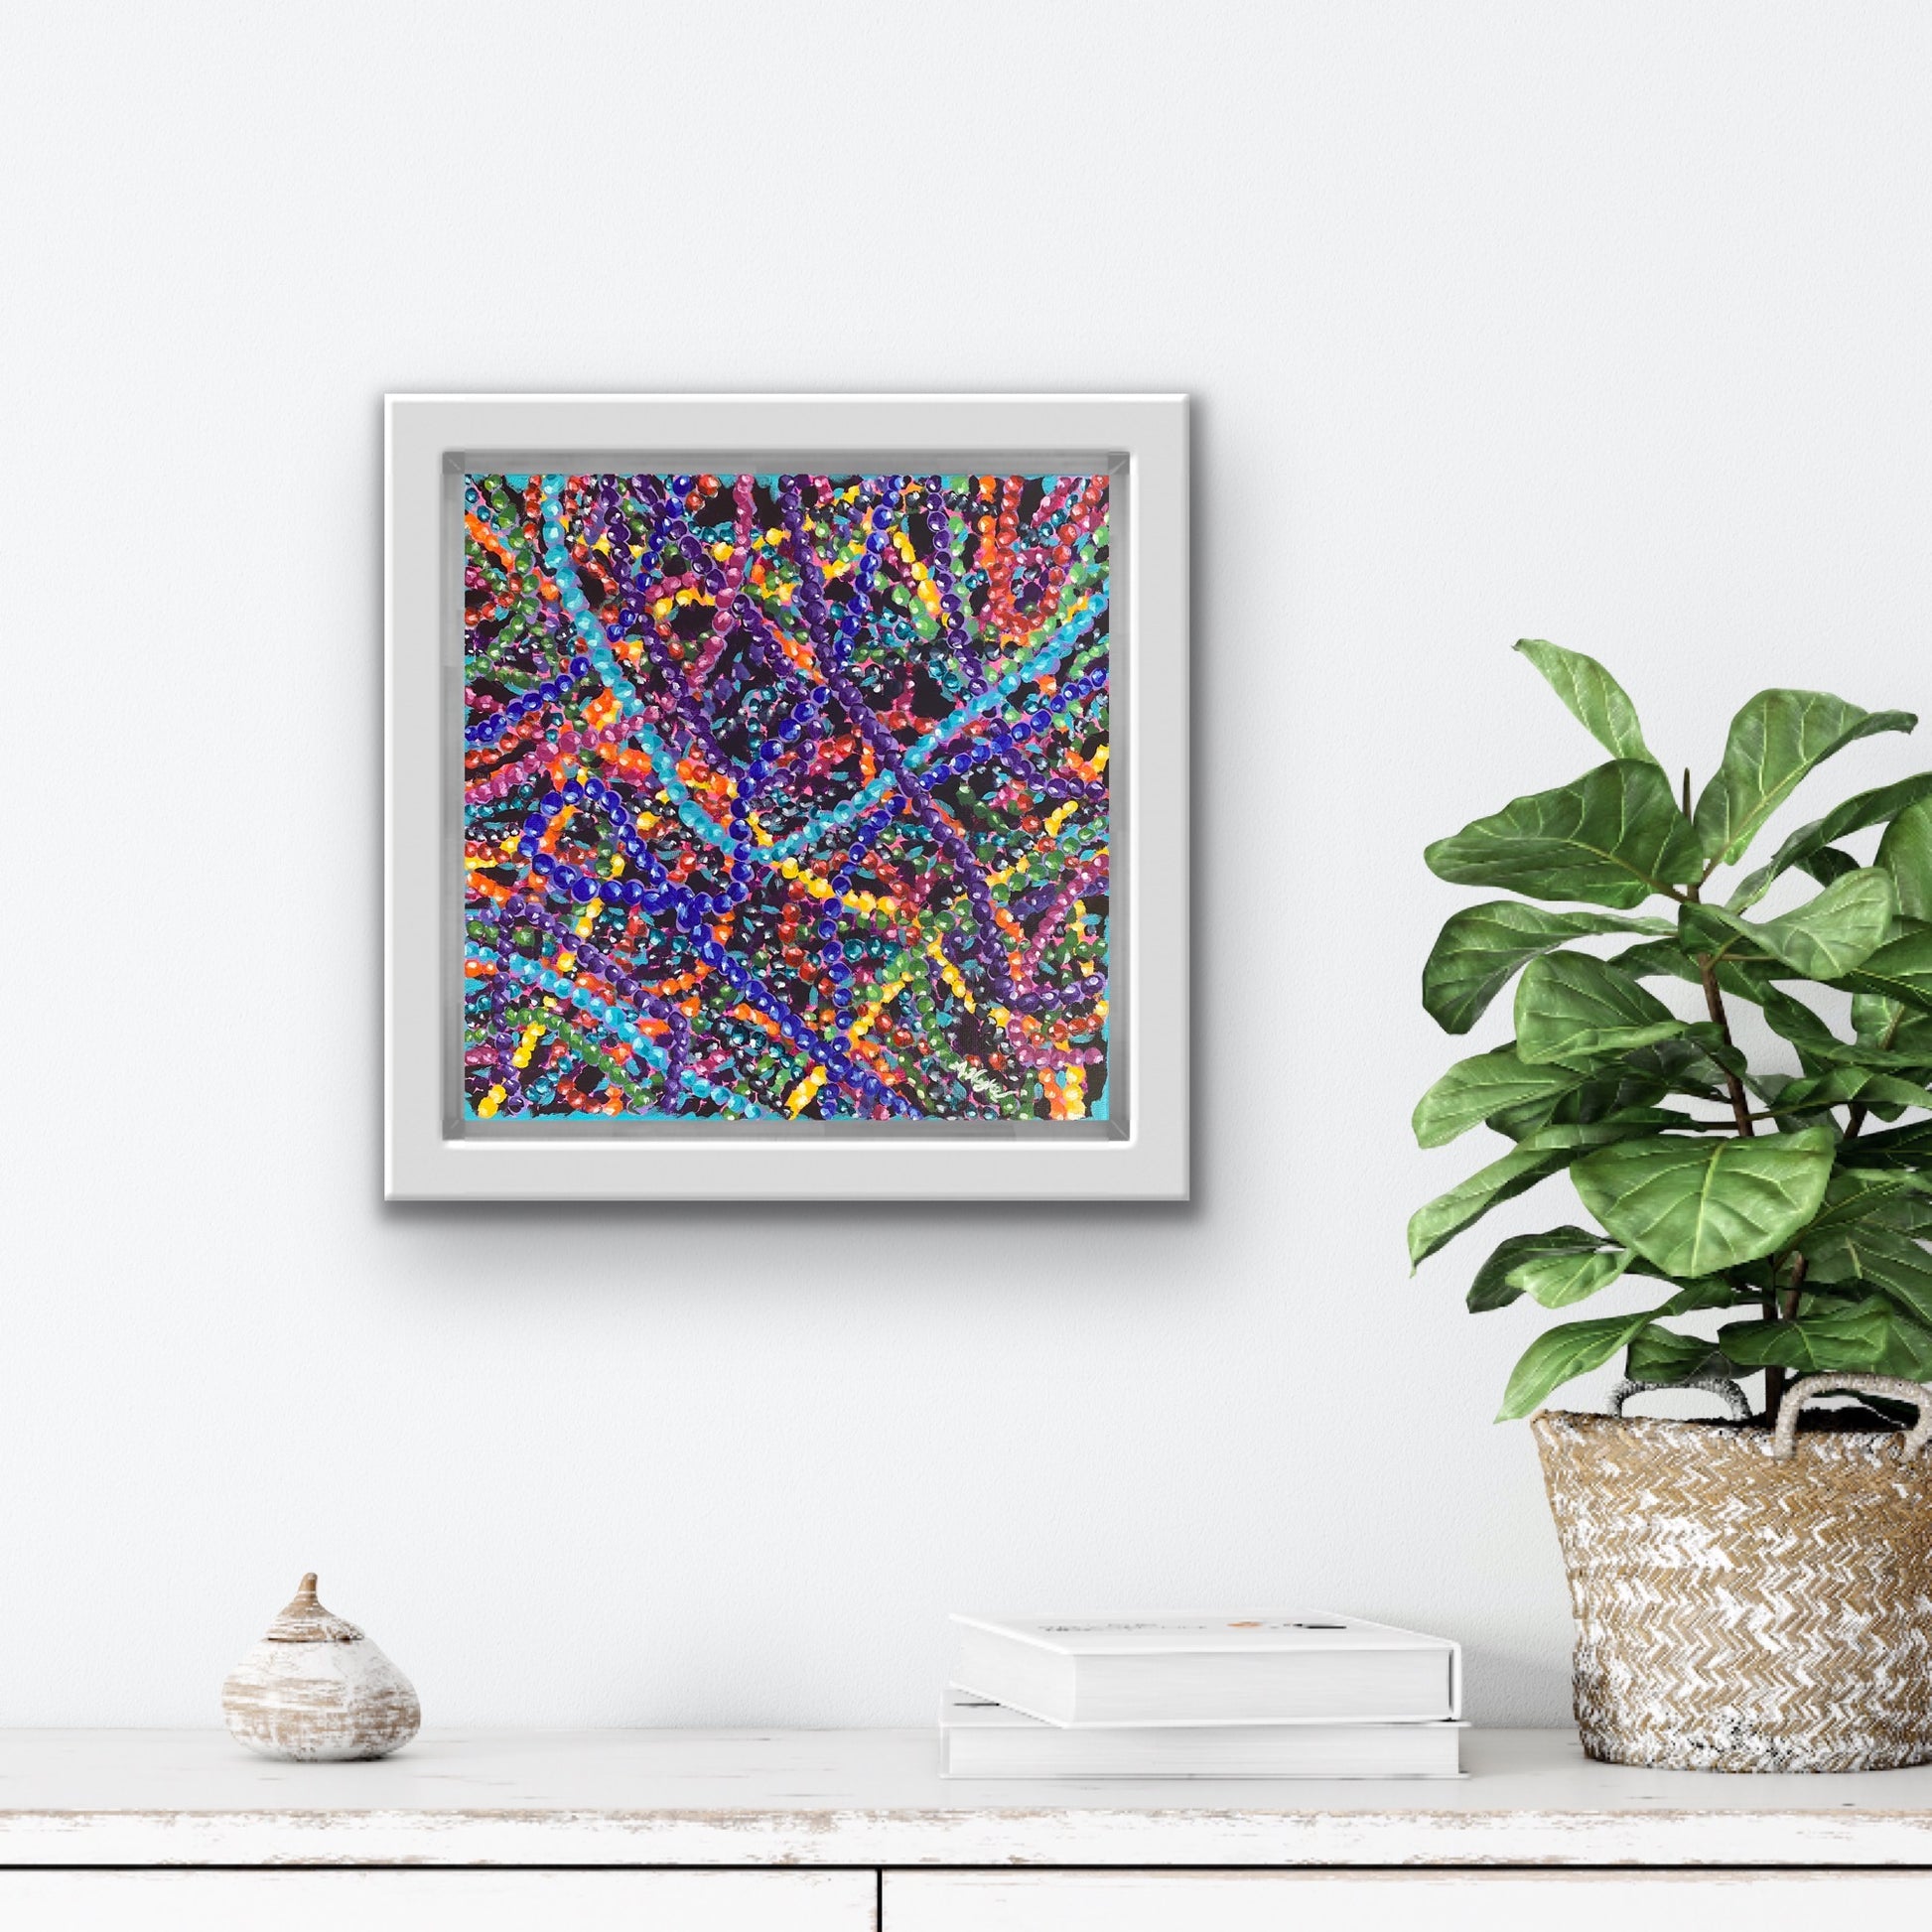 Travel Art By Alexandra Wuyke Art original painting "Bunches of Beads" hangs over a fireplace in a living room.